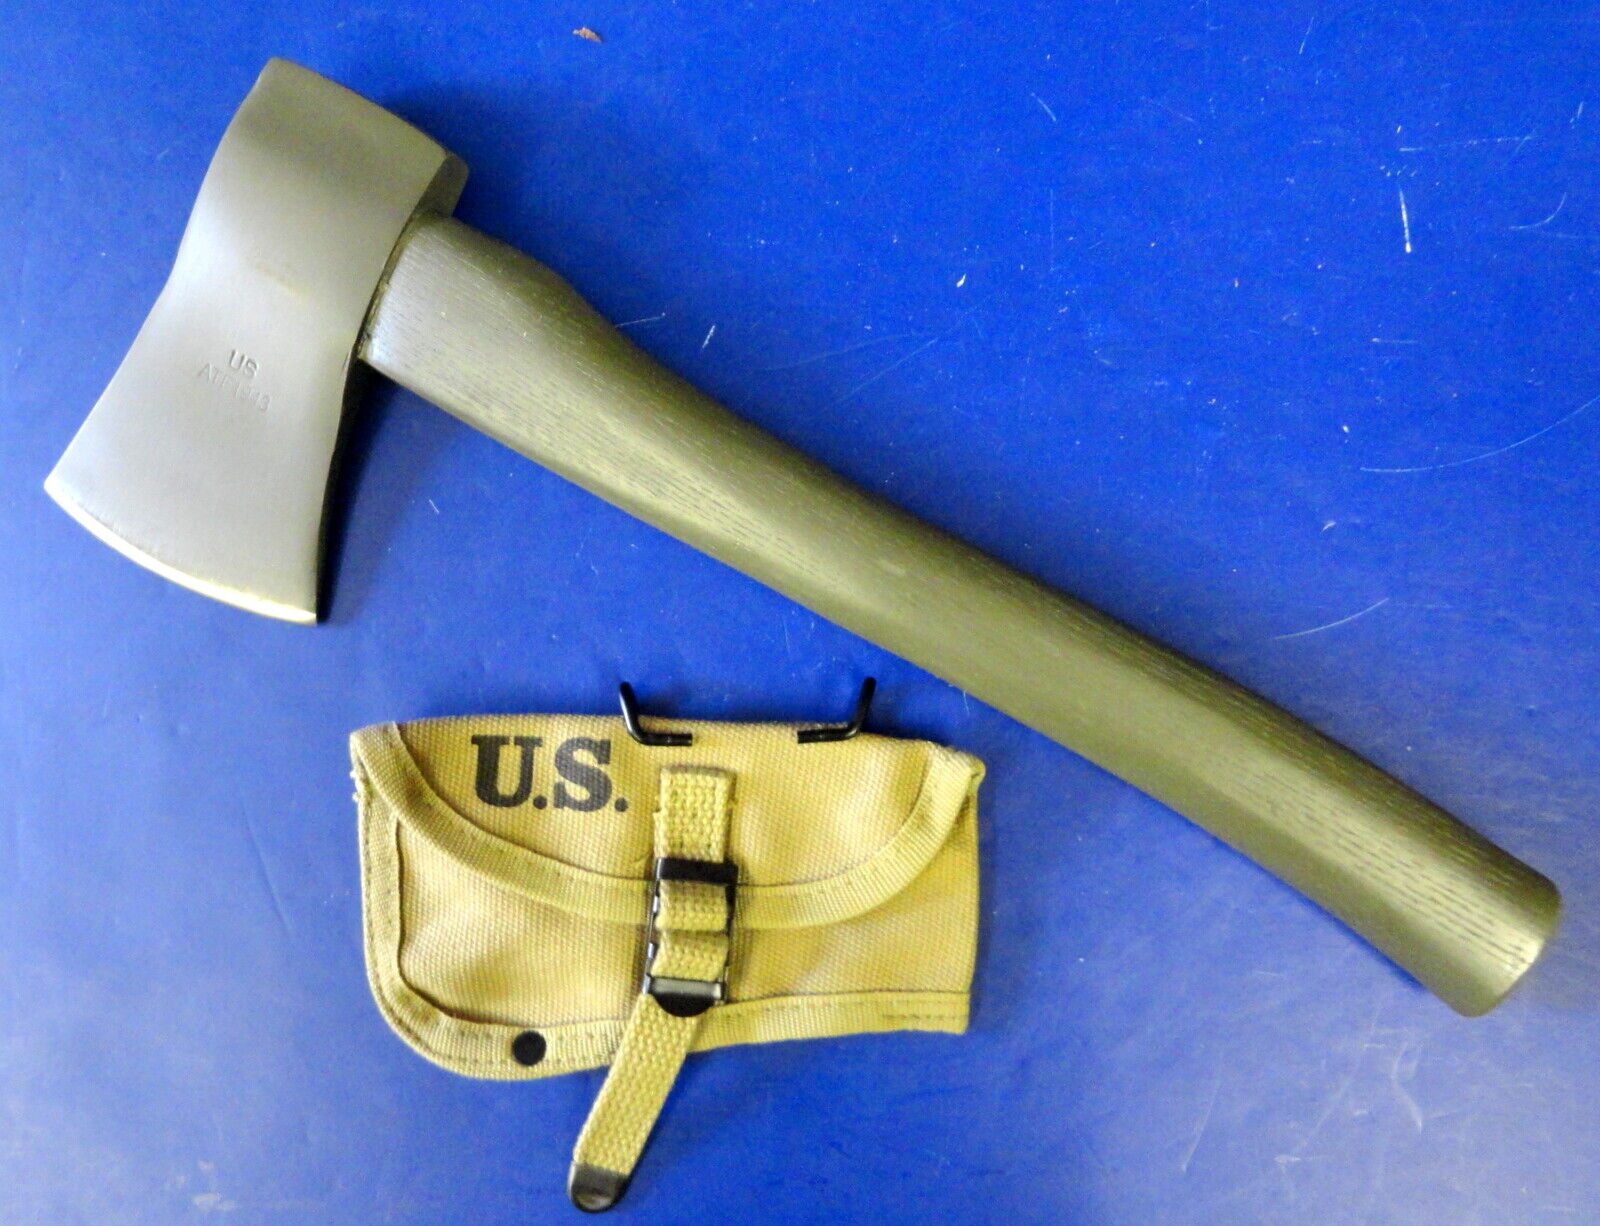 U.S. MODEL M-1910 HAND AXE AND CANVAS COVER 1944